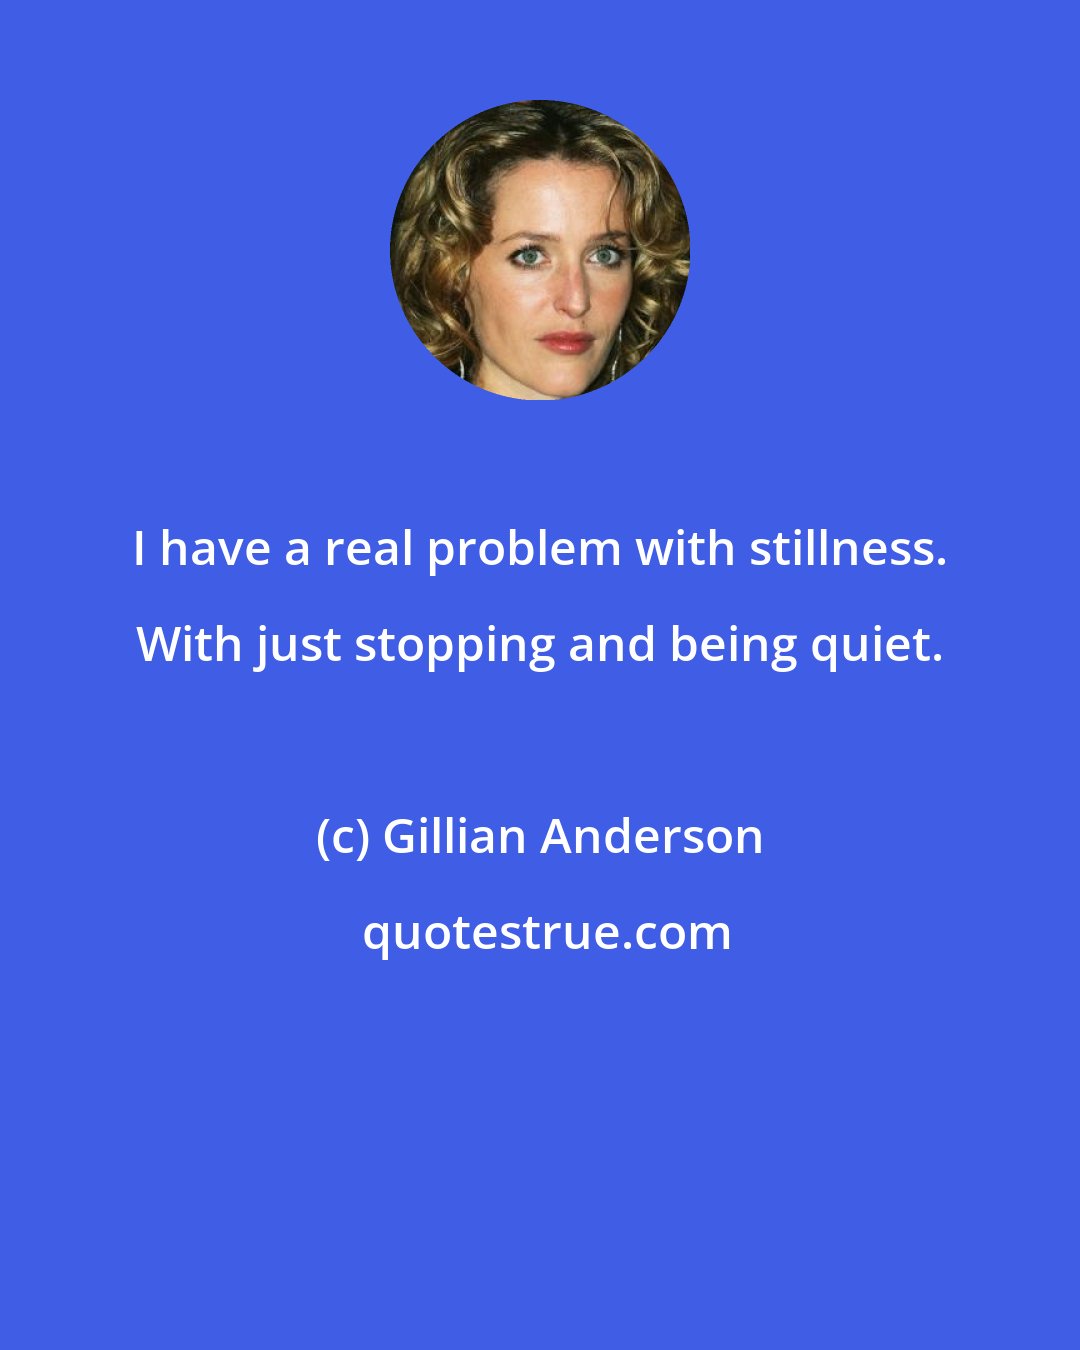 Gillian Anderson: I have a real problem with stillness. With just stopping and being quiet.